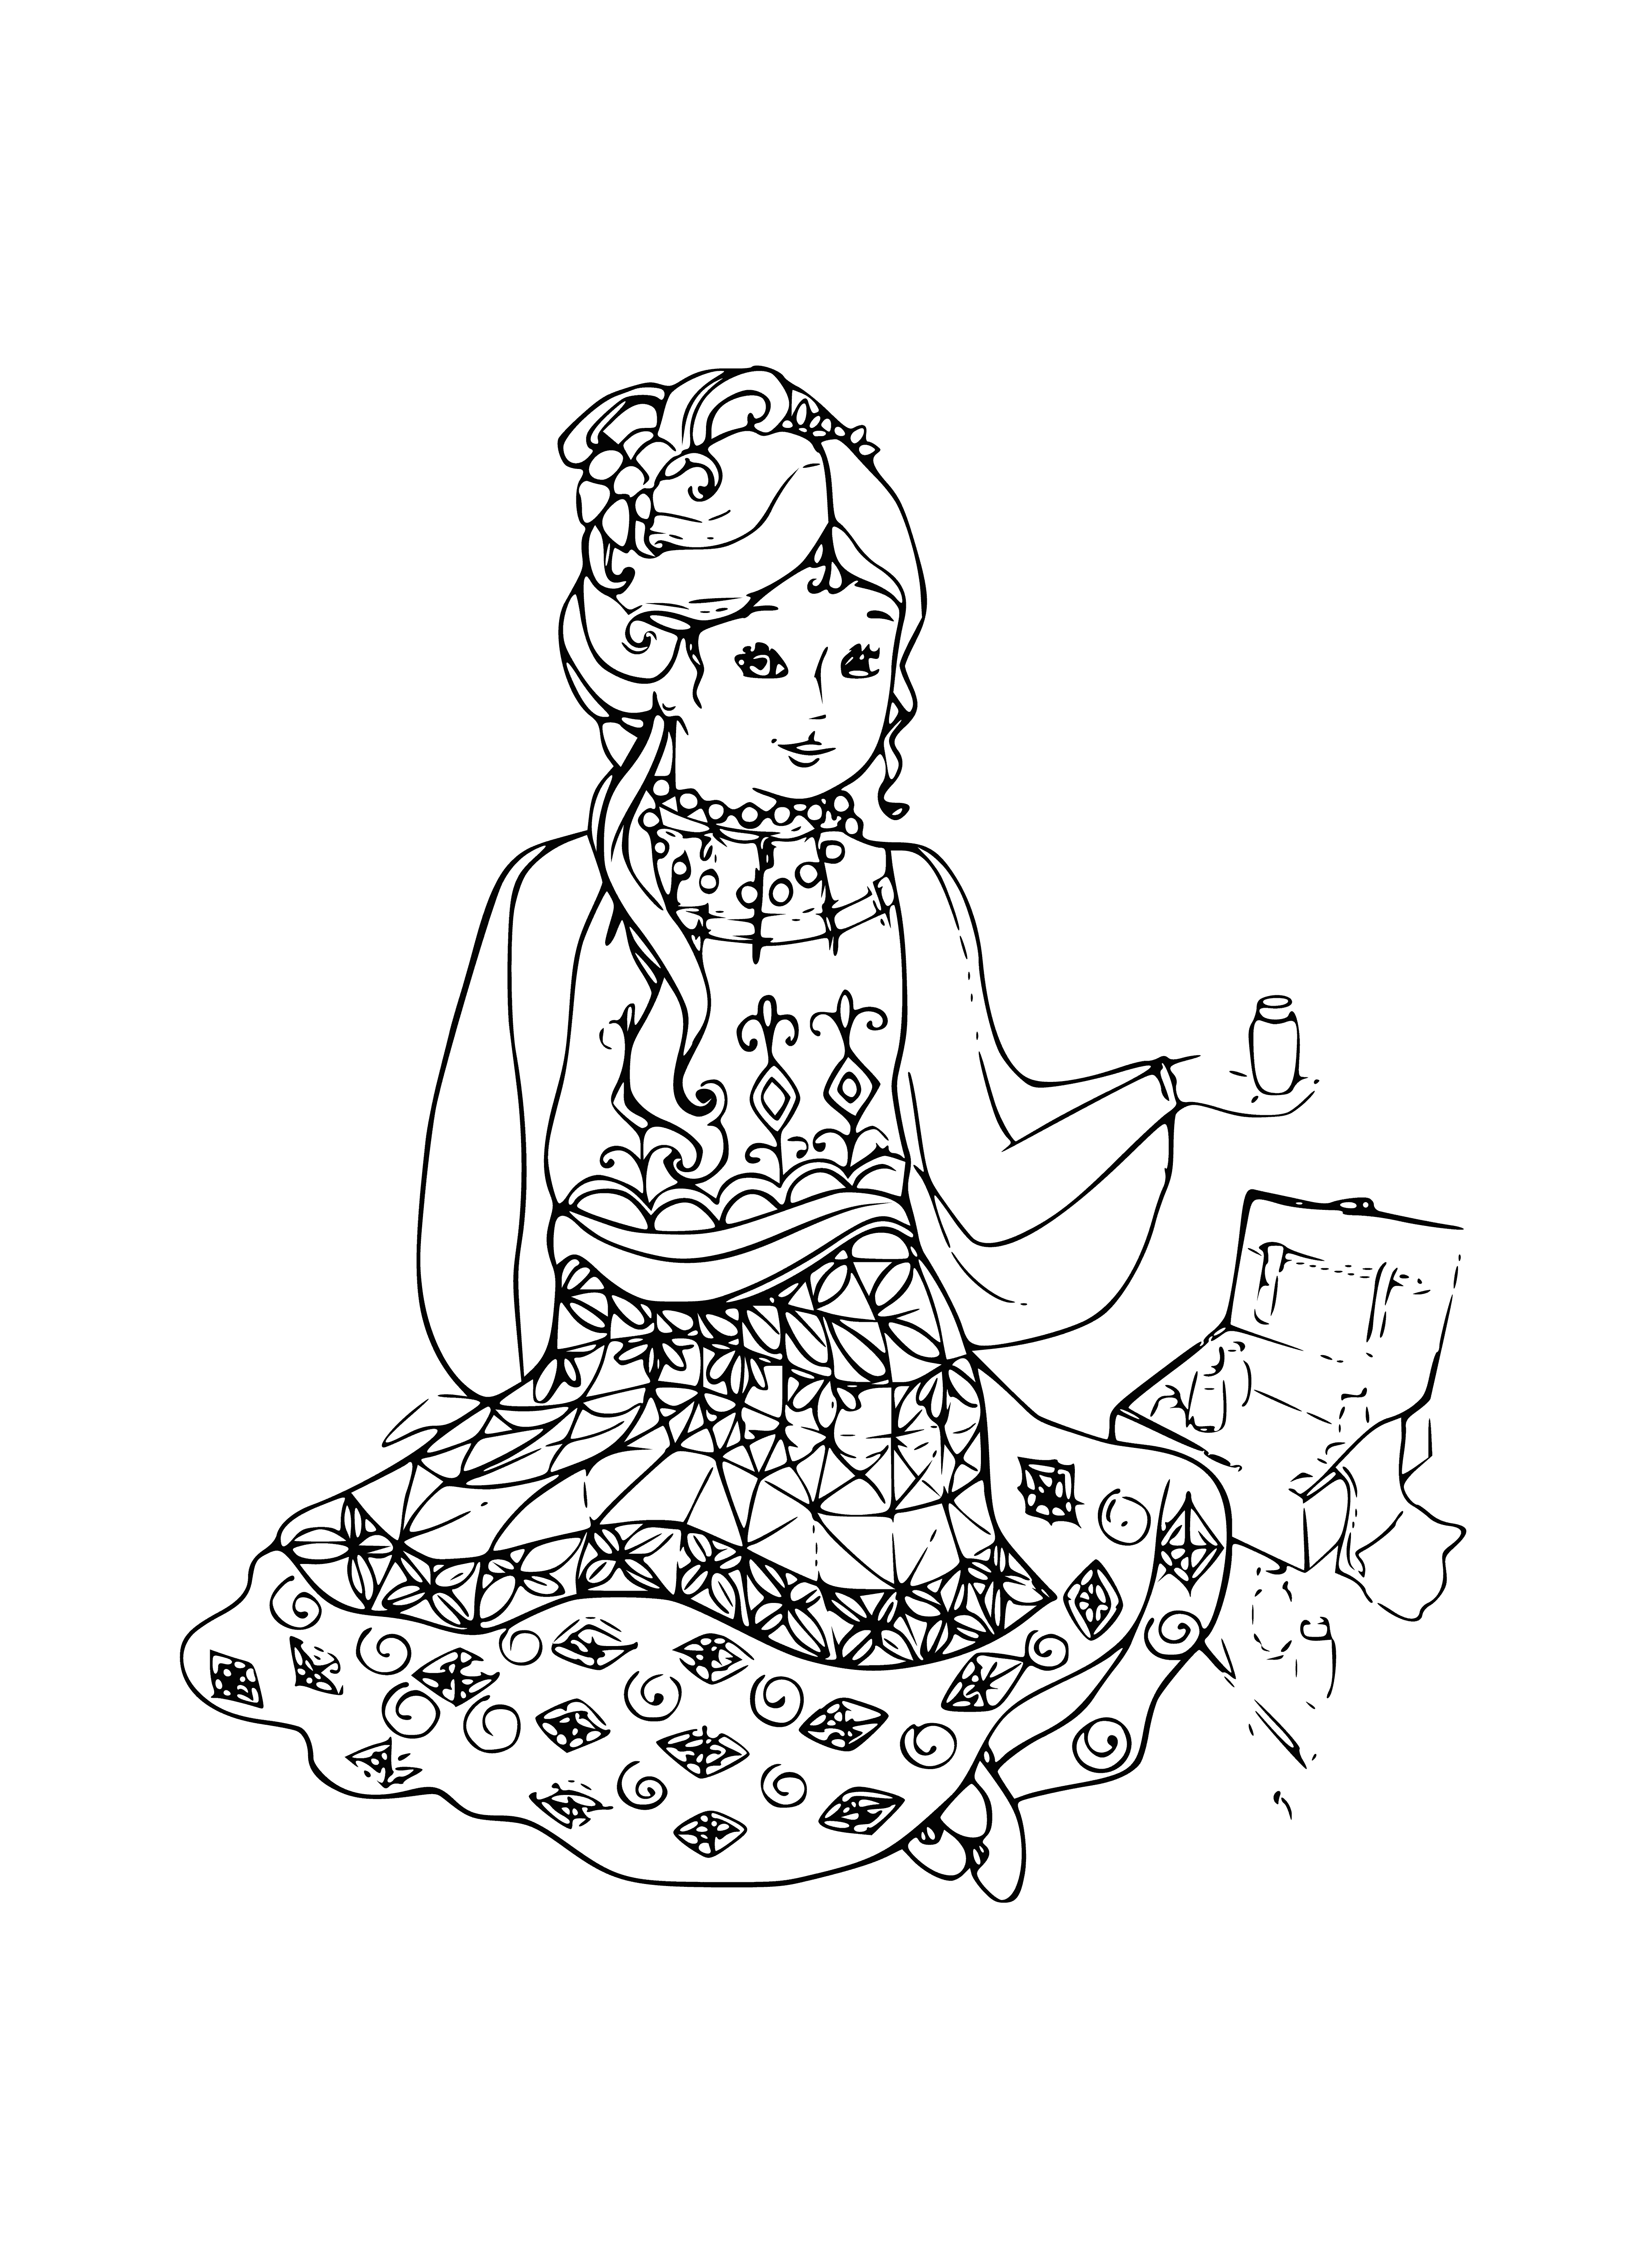 coloring page: Young woman in traditional Russian outfit in rural landscape is the focus of a painting: blouse, red scarf, flowered skirt, dark hair in bun and headscarf.